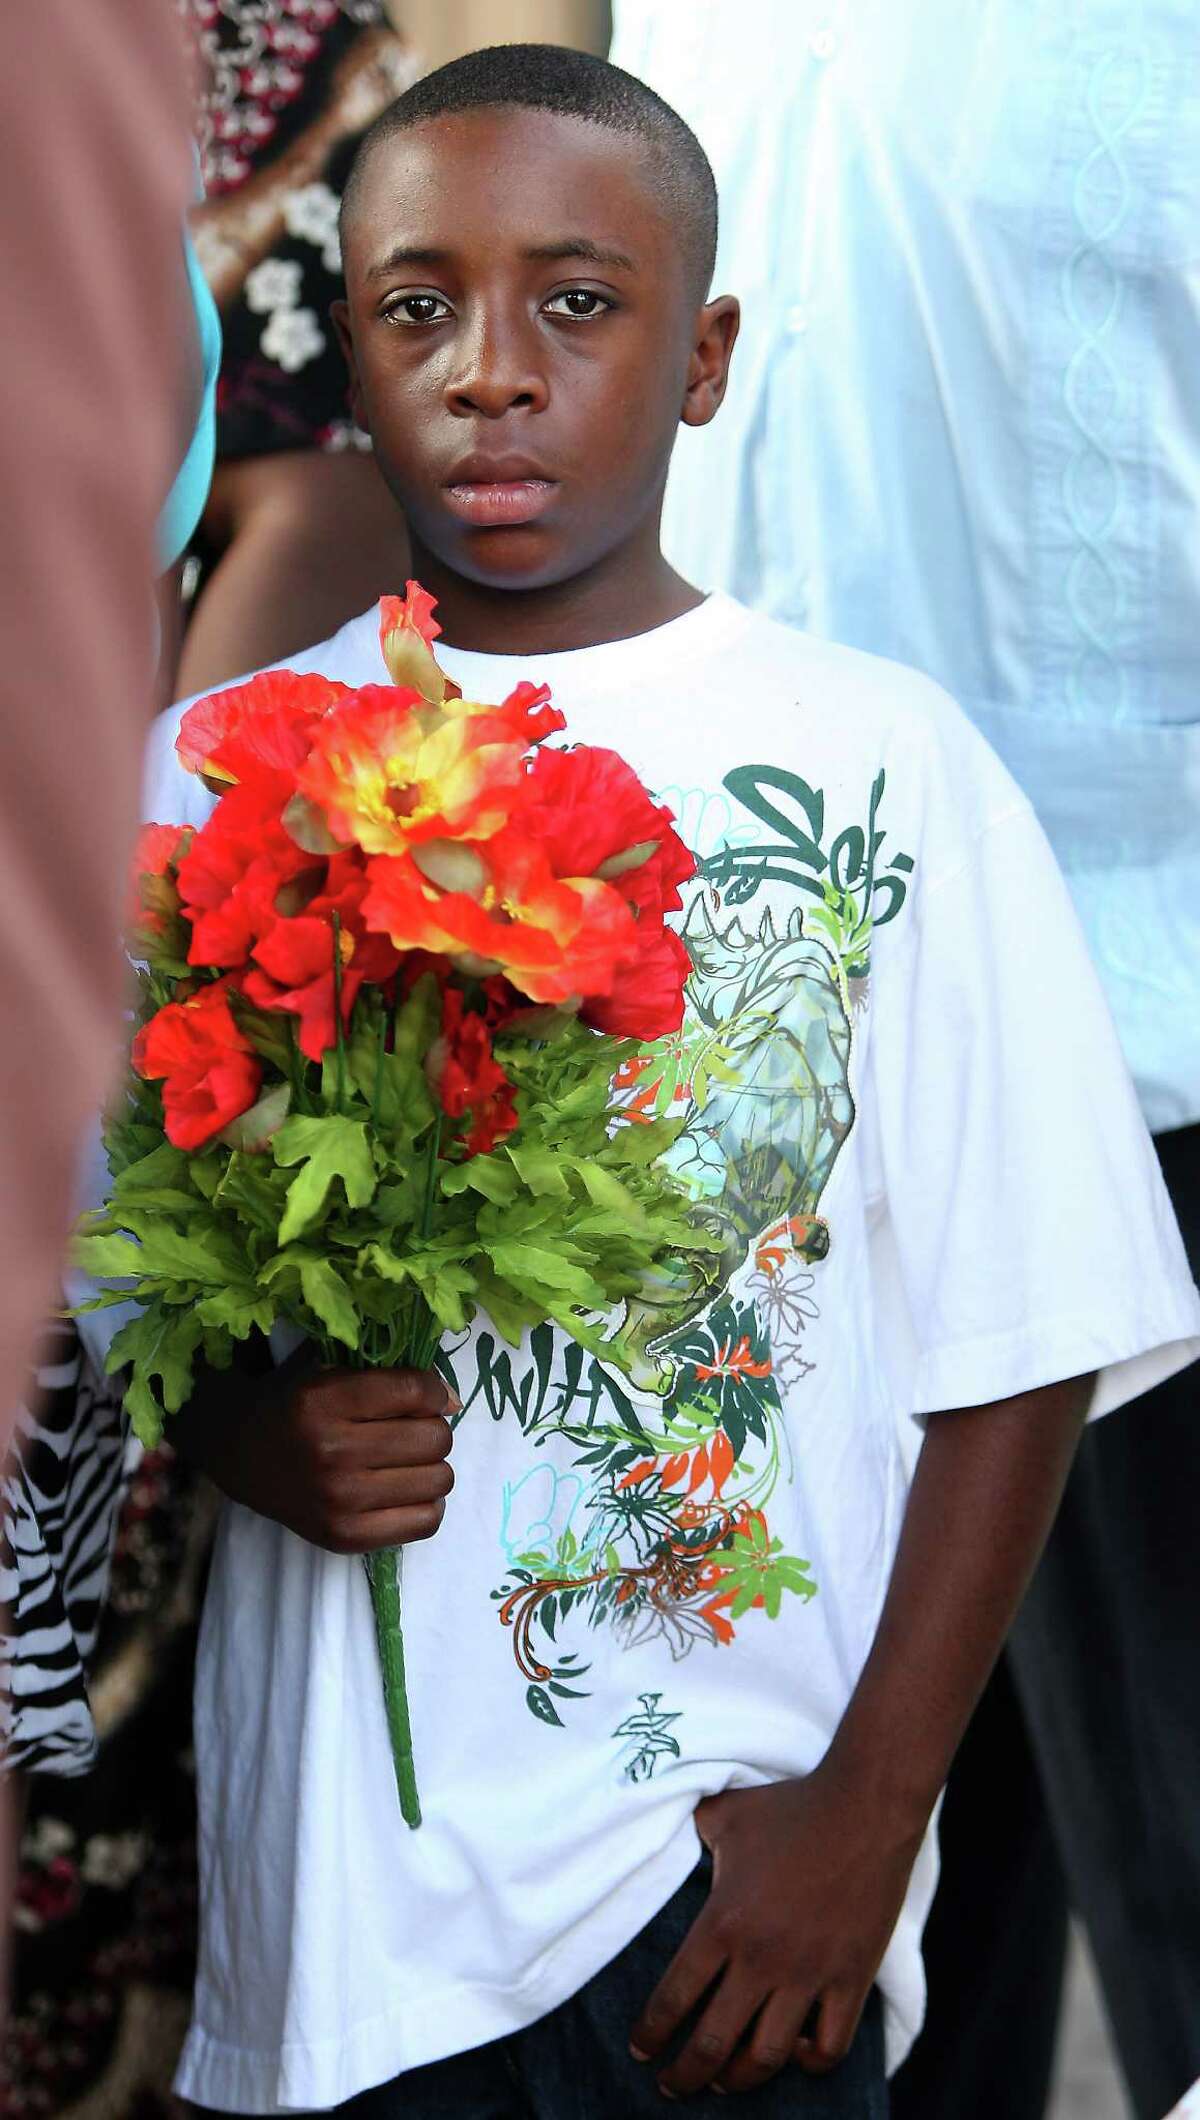 Tiger Polk, 10, holds flowers for his family member Erica Dotson, 29, during a vigil at the scene of a strip club at 9850 Westpark, where three people, including Dotson, were shot to death and two were injured including local rapper Trae Tha Truth, early Wednesday morning, Wednesday, June 20, 2012, in Houston.